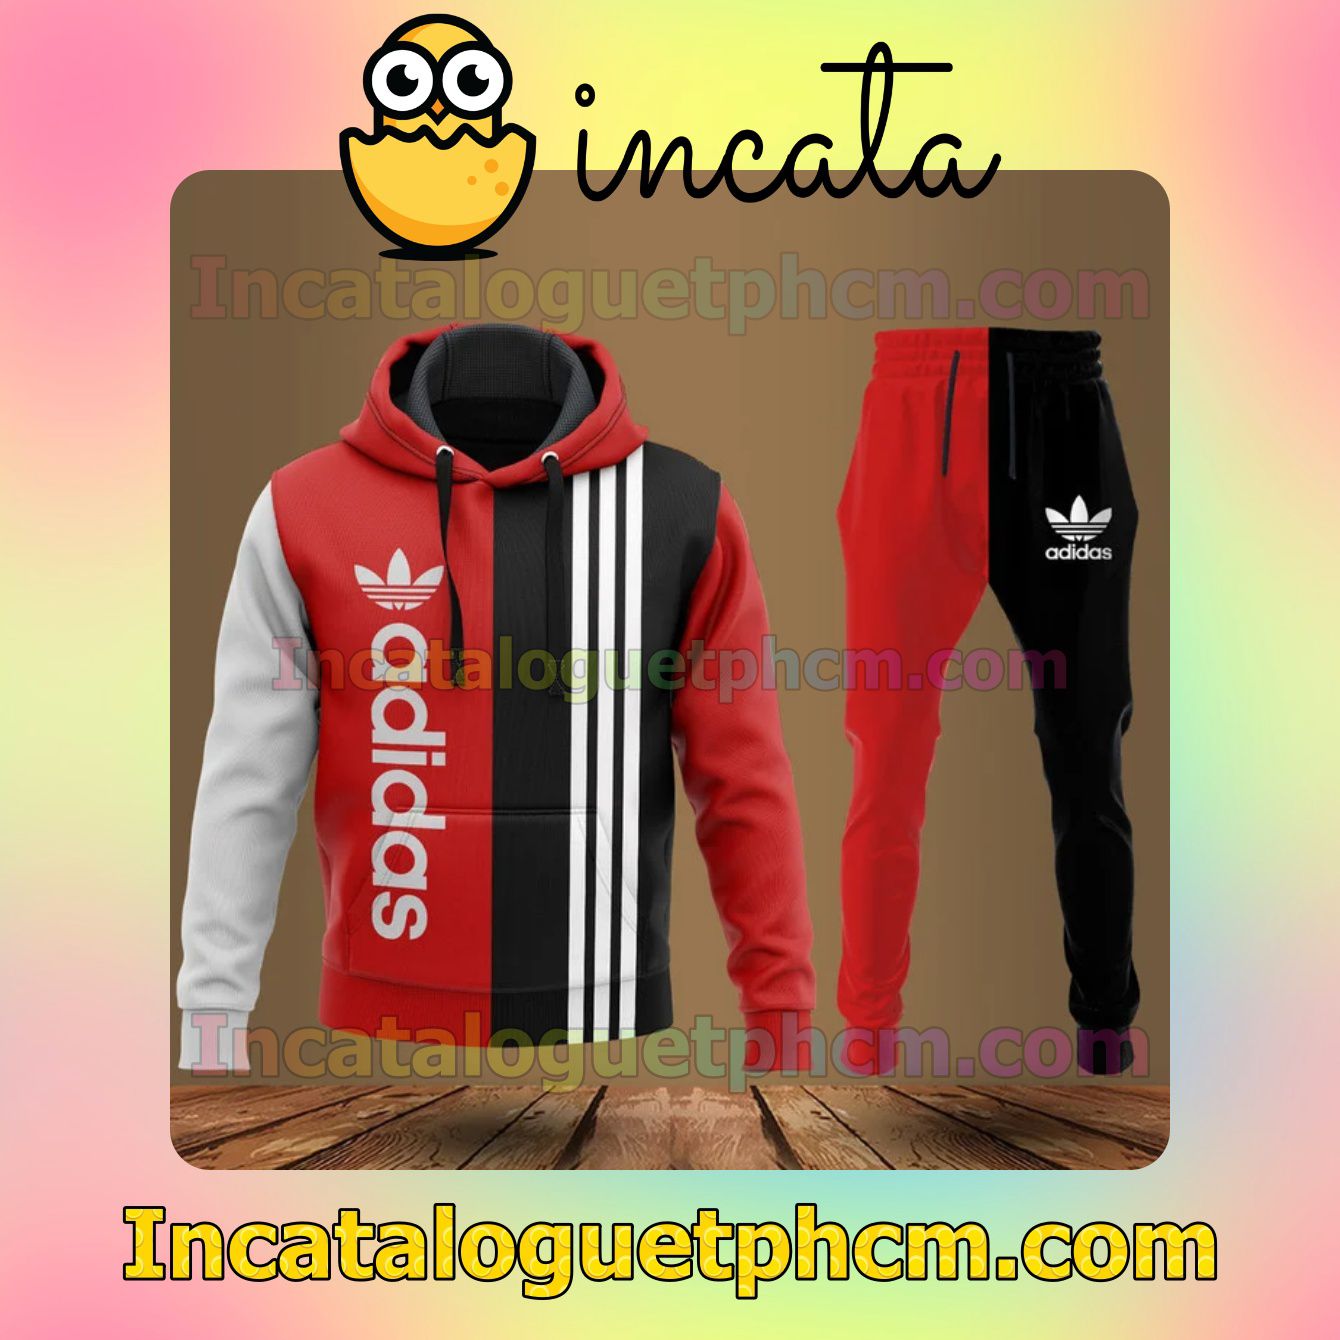 Adidas Black And Red With White Vertical Stripes Zipper Hooded Sweatshirt And Pants